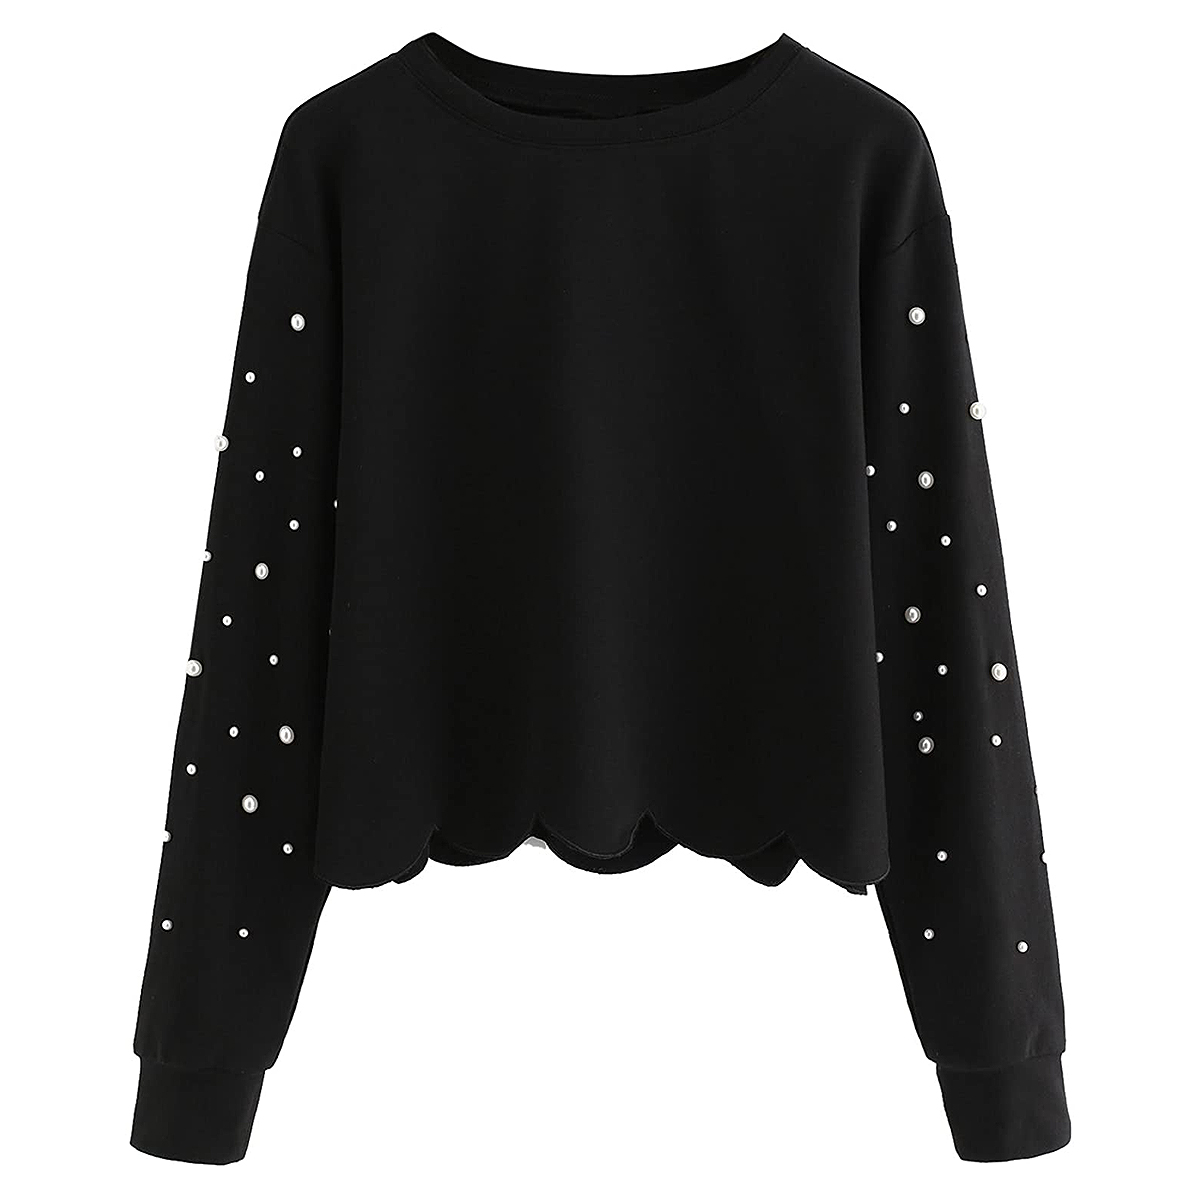 Romwe Sweatshirt Is Perfect for the Holidays, Work or Movie Night | Us ...